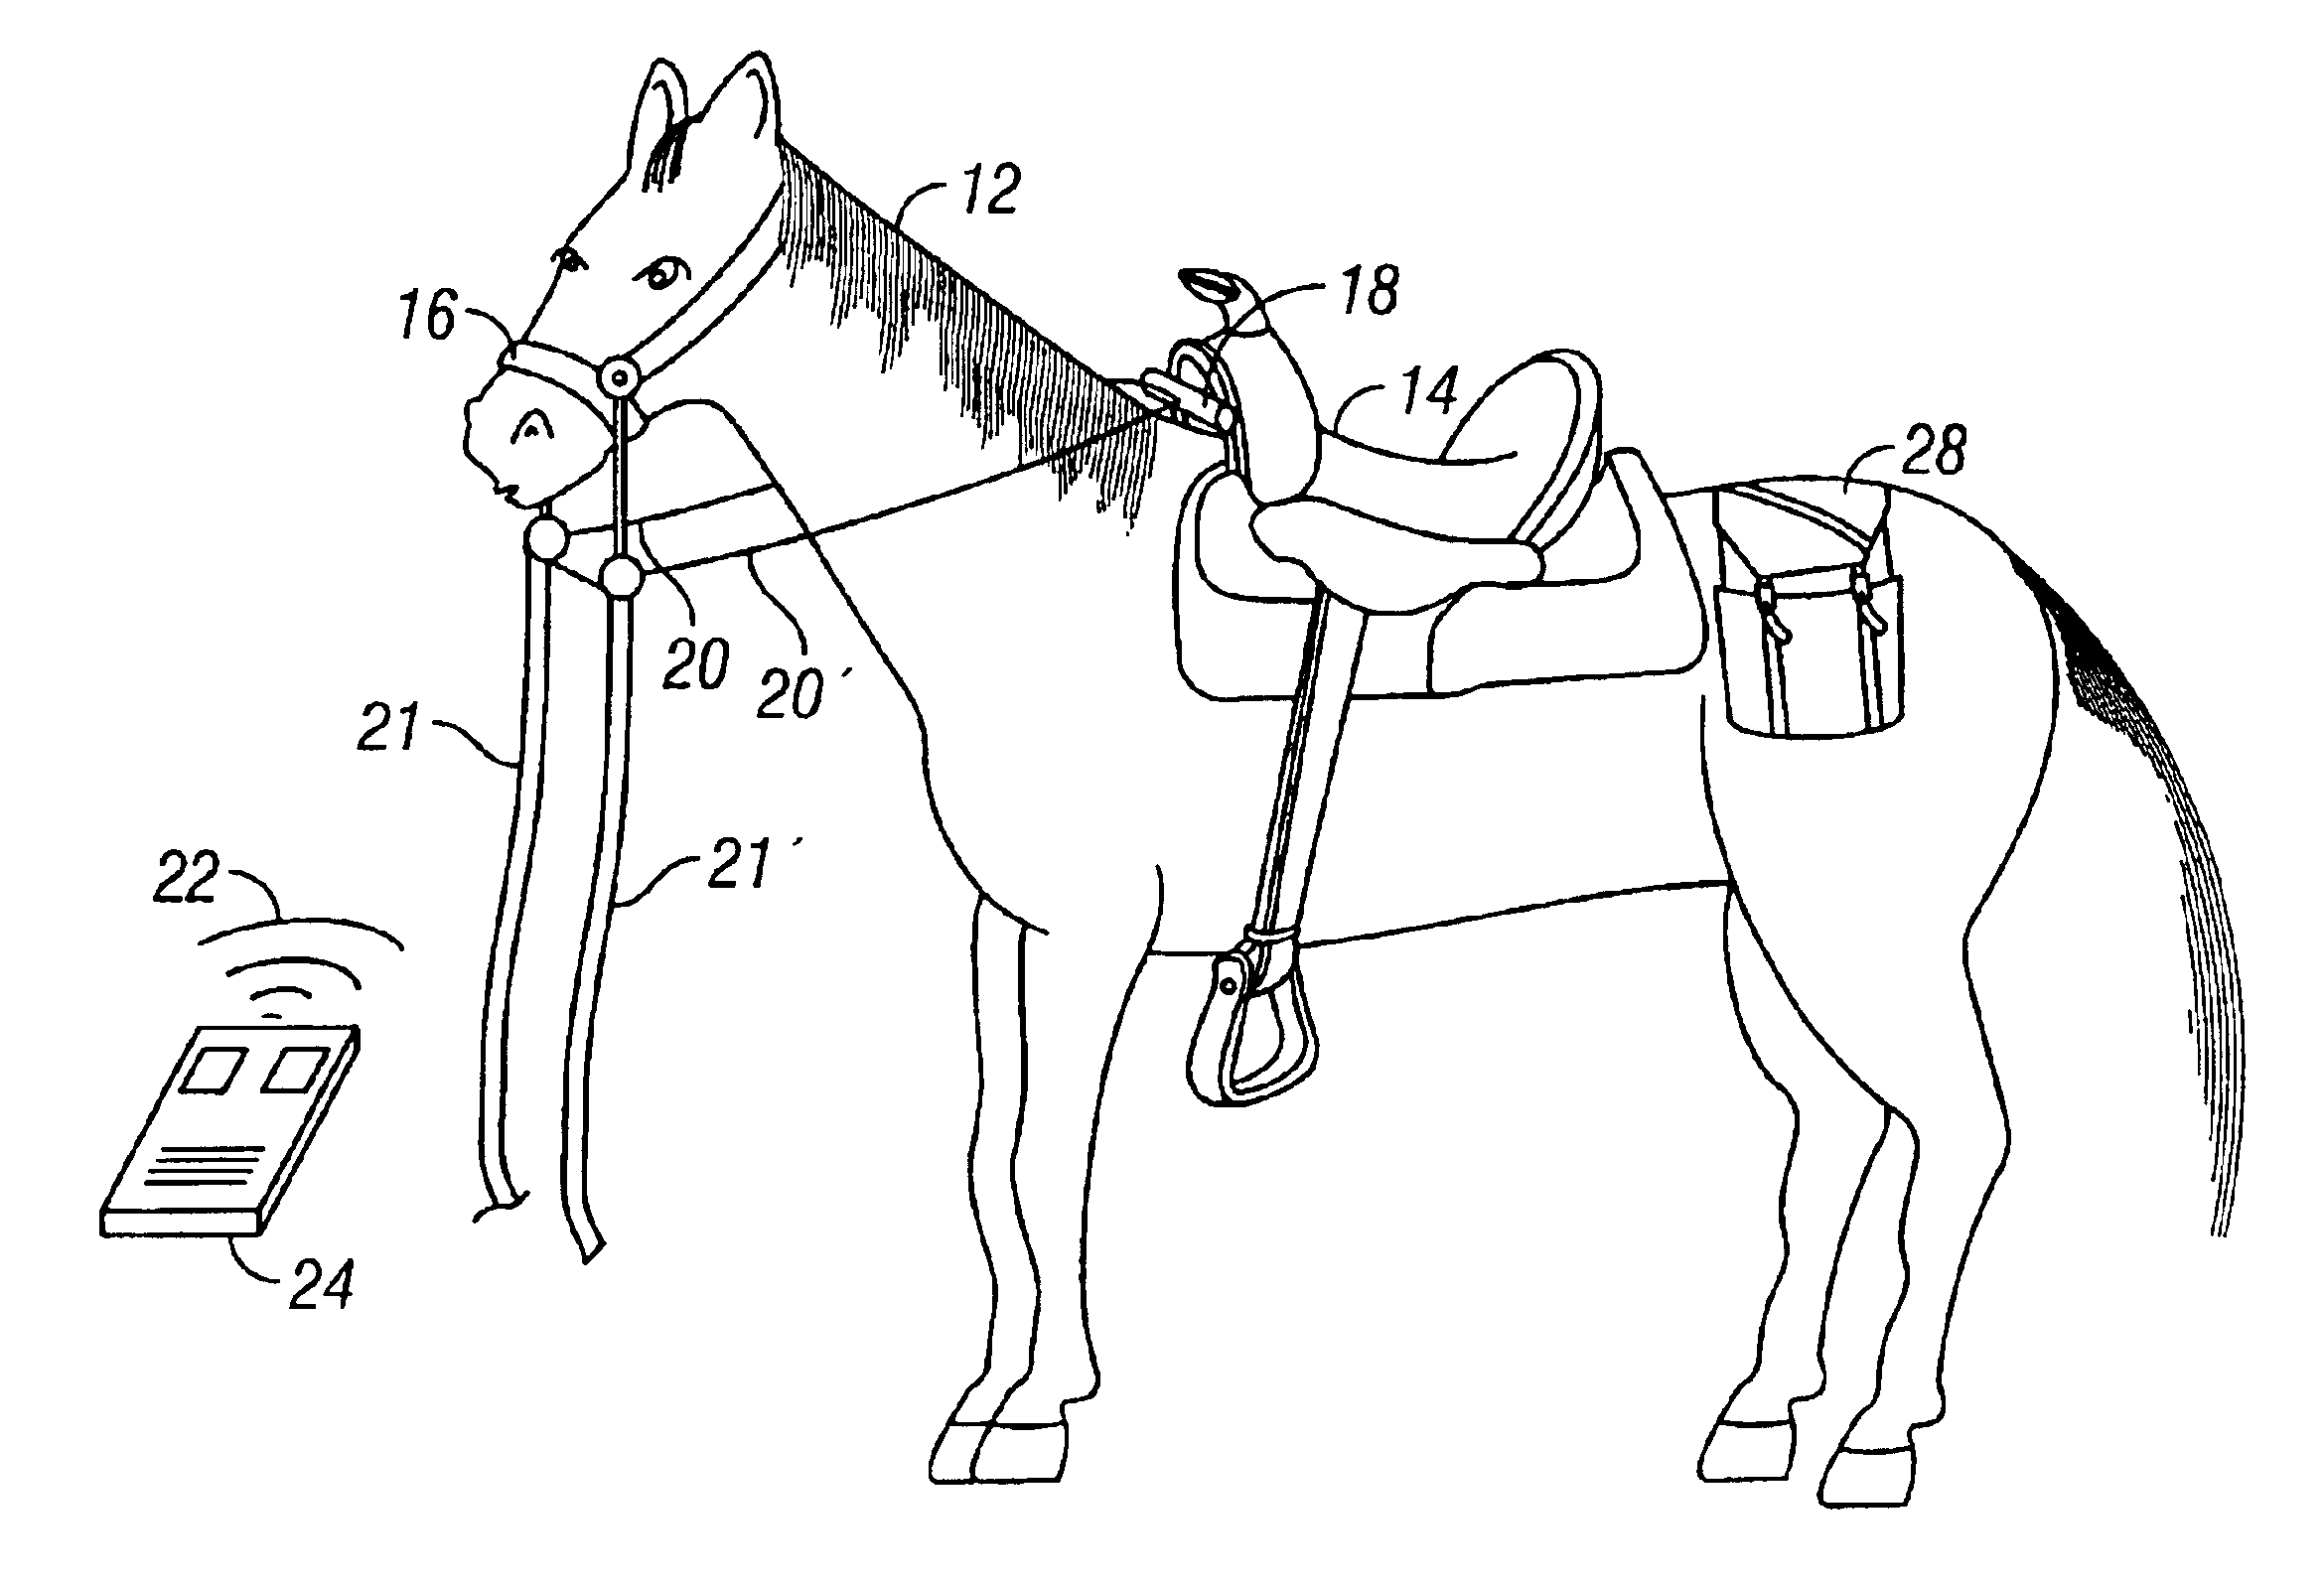 Apparatus and method for controlling an animal